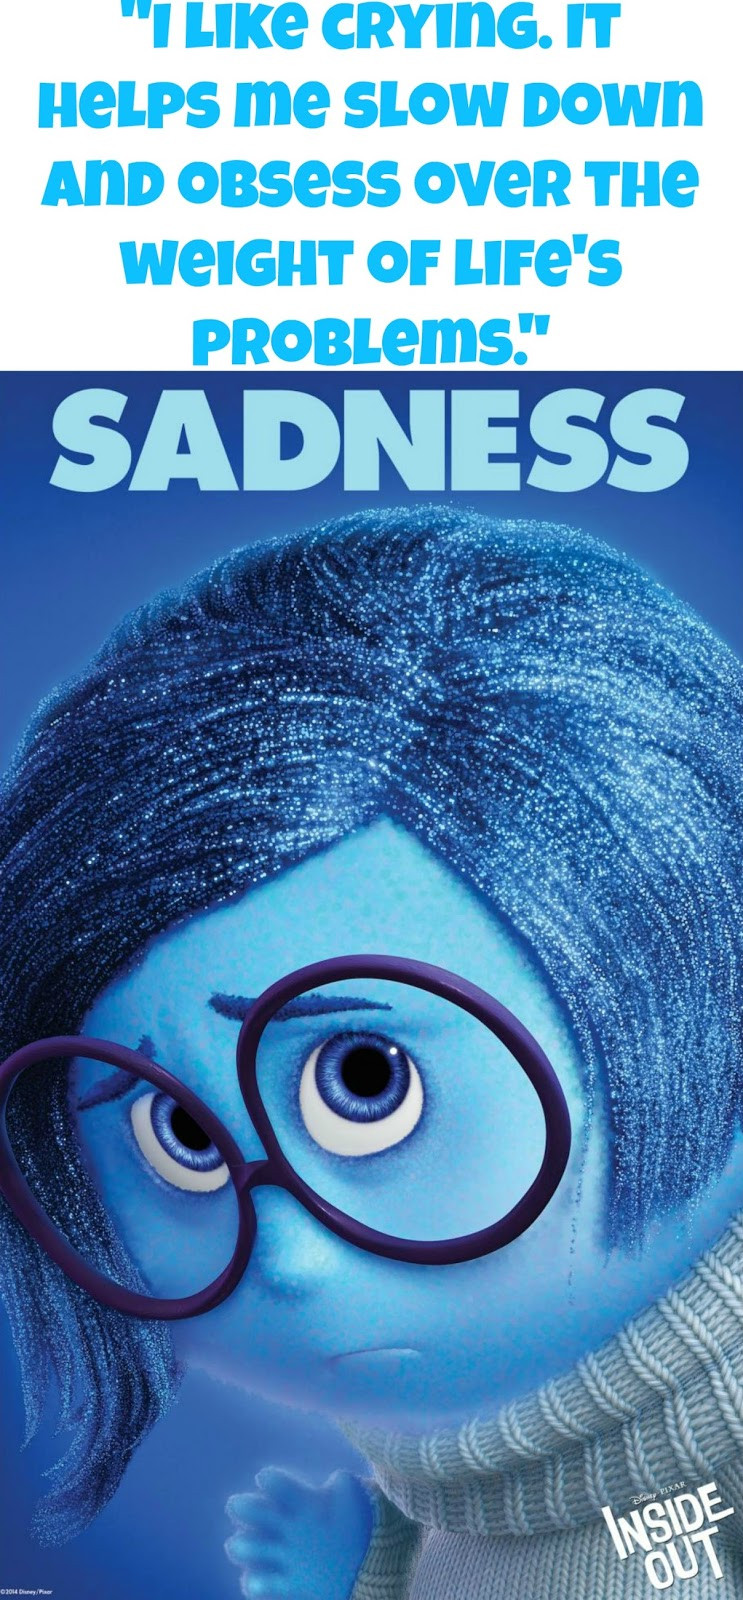 Sadness Quotes Inside Out
 Disney Sisters Inside Out Movie Quotes and Activity Pages